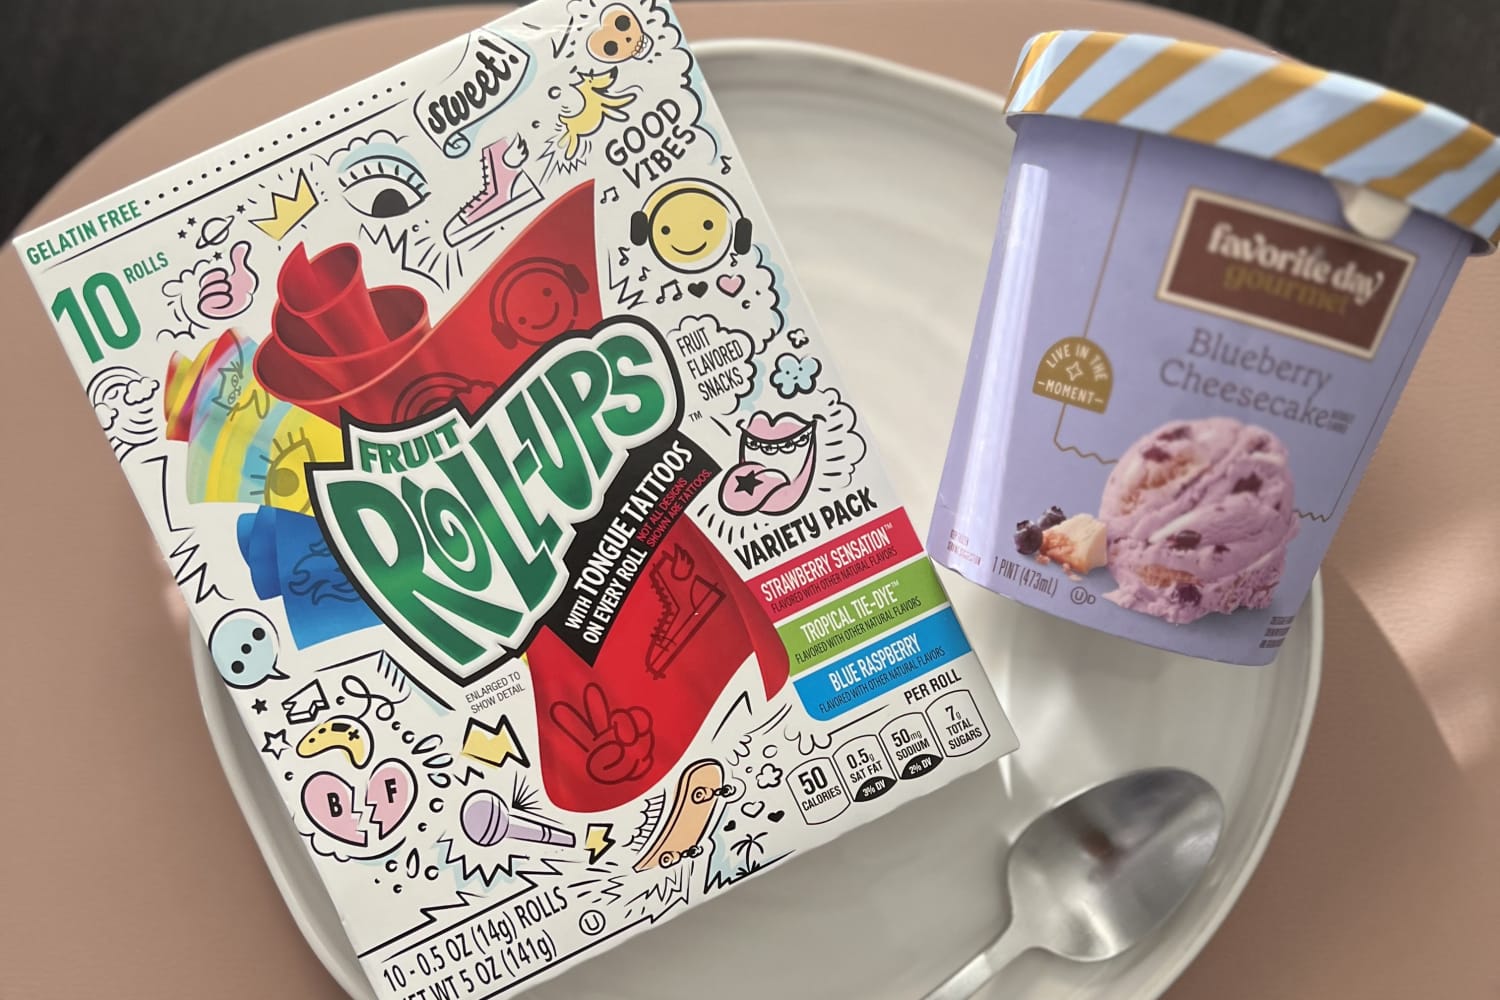 I Tried the Fruit Roll-Ups and Ice Cream Snack That Everybody Is Obsessive about and I Completely Perceive the Hype